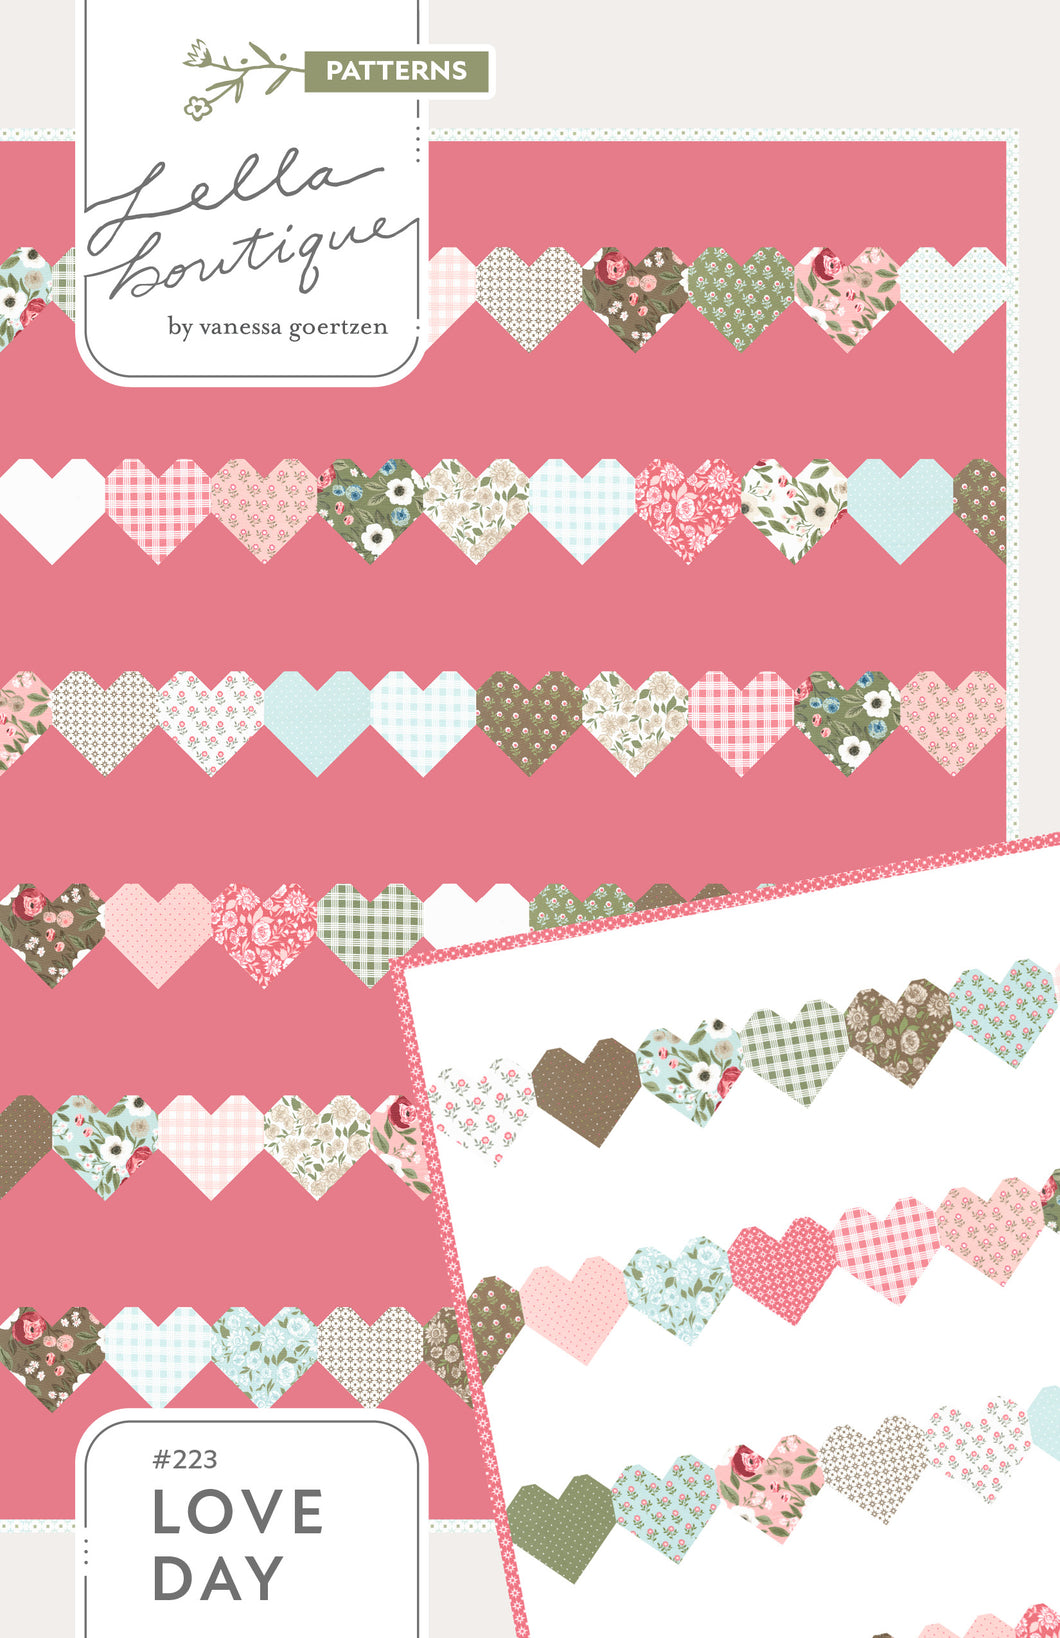 Love Day heart pattern by Lella Boutique. Simple heart pattern made with fat quarters or fat eighths. Fabric is Lovestruck by Lella Boutique for Moda Fabrics.